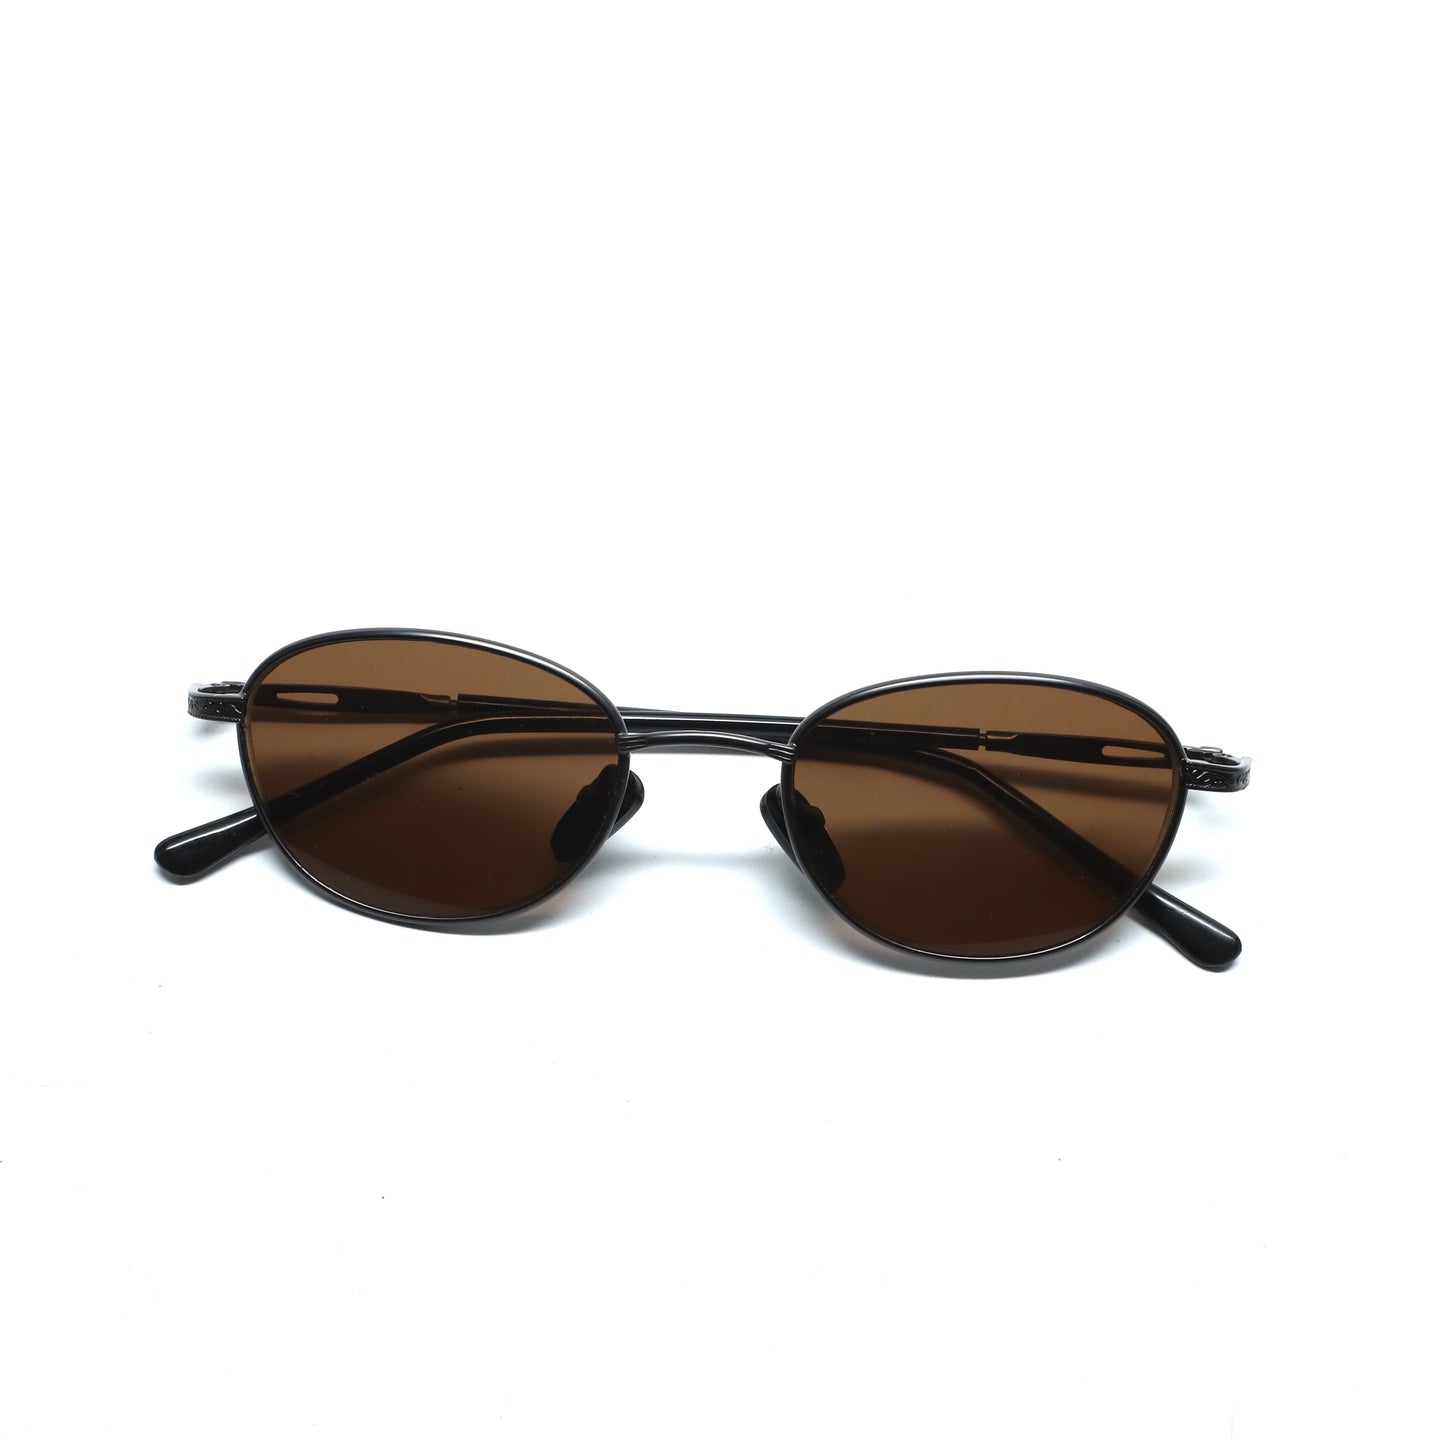 //Style M30// Vintage Geometric Oval Wire Frame Sunglasses - Brown